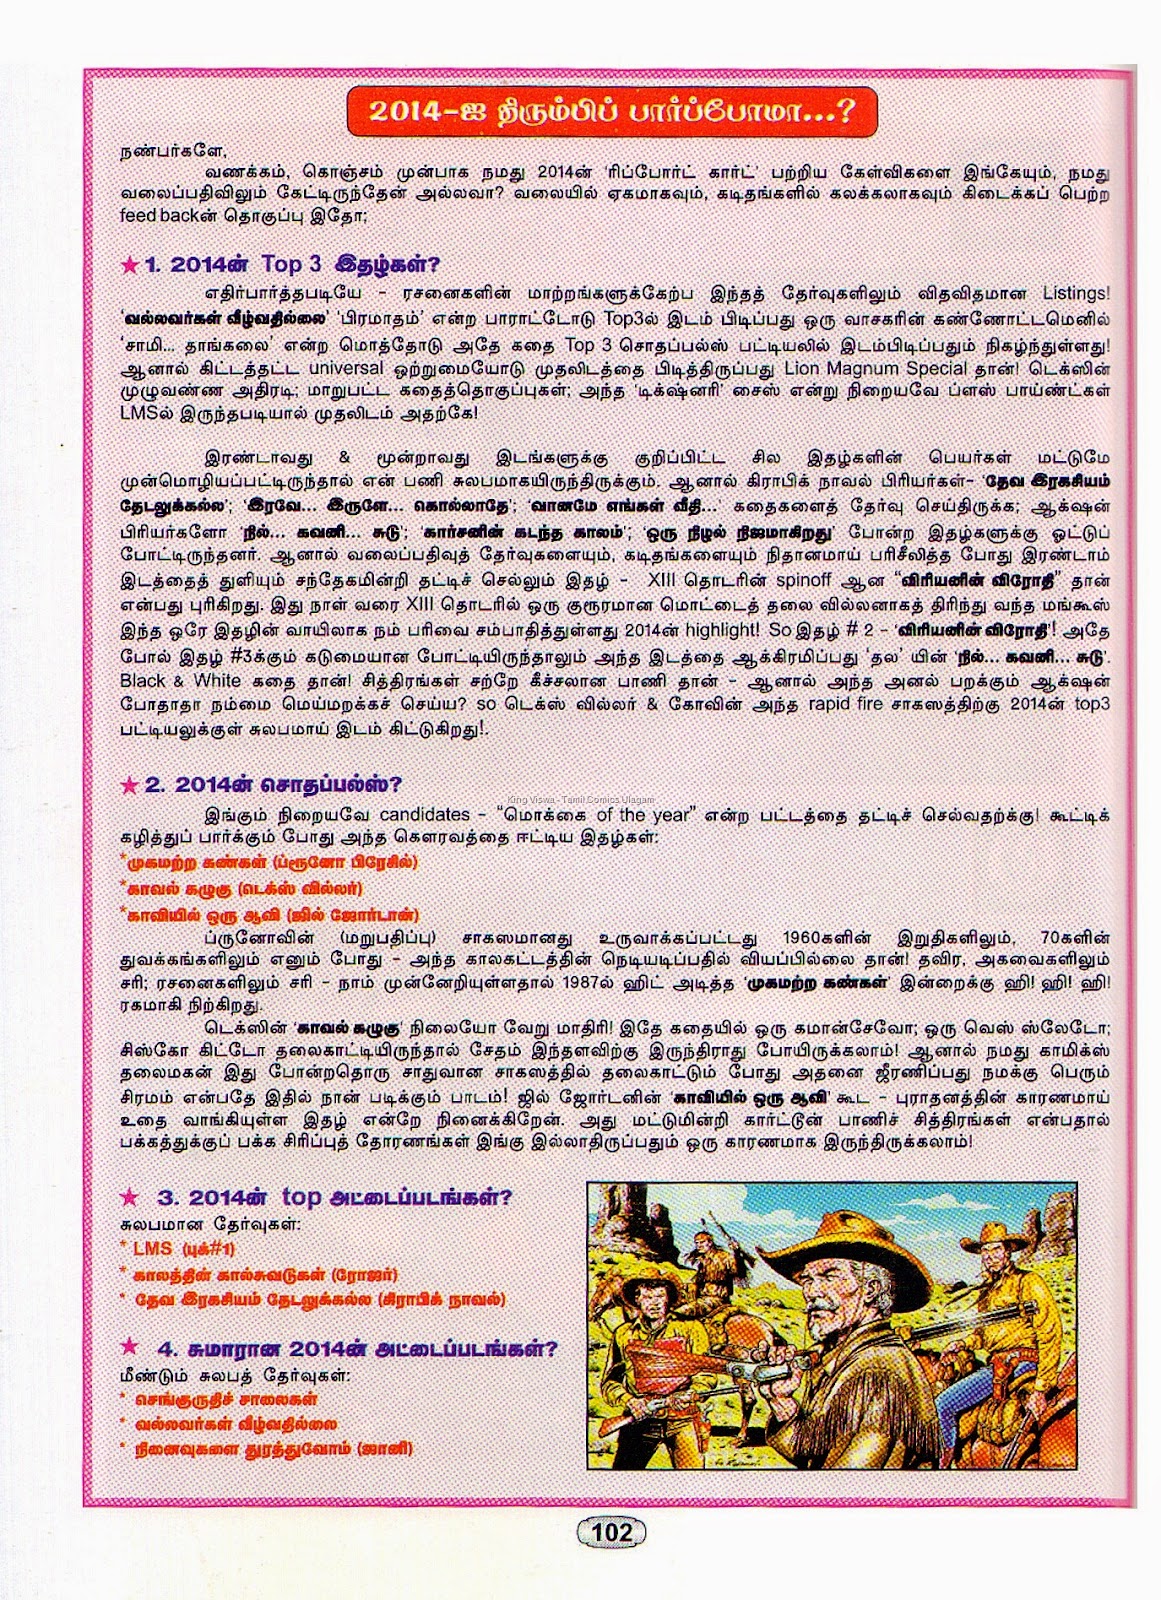 [Muthu%2520Comics%2520Issue%2520No%2520338%2520Dated%2520March%25202015%2520Captain%2520Tiger%2520Vengaikke%2520Mudivuraiyaa%2520Page%2520No%2520102%25202014%2520review%255B2%255D.jpg]